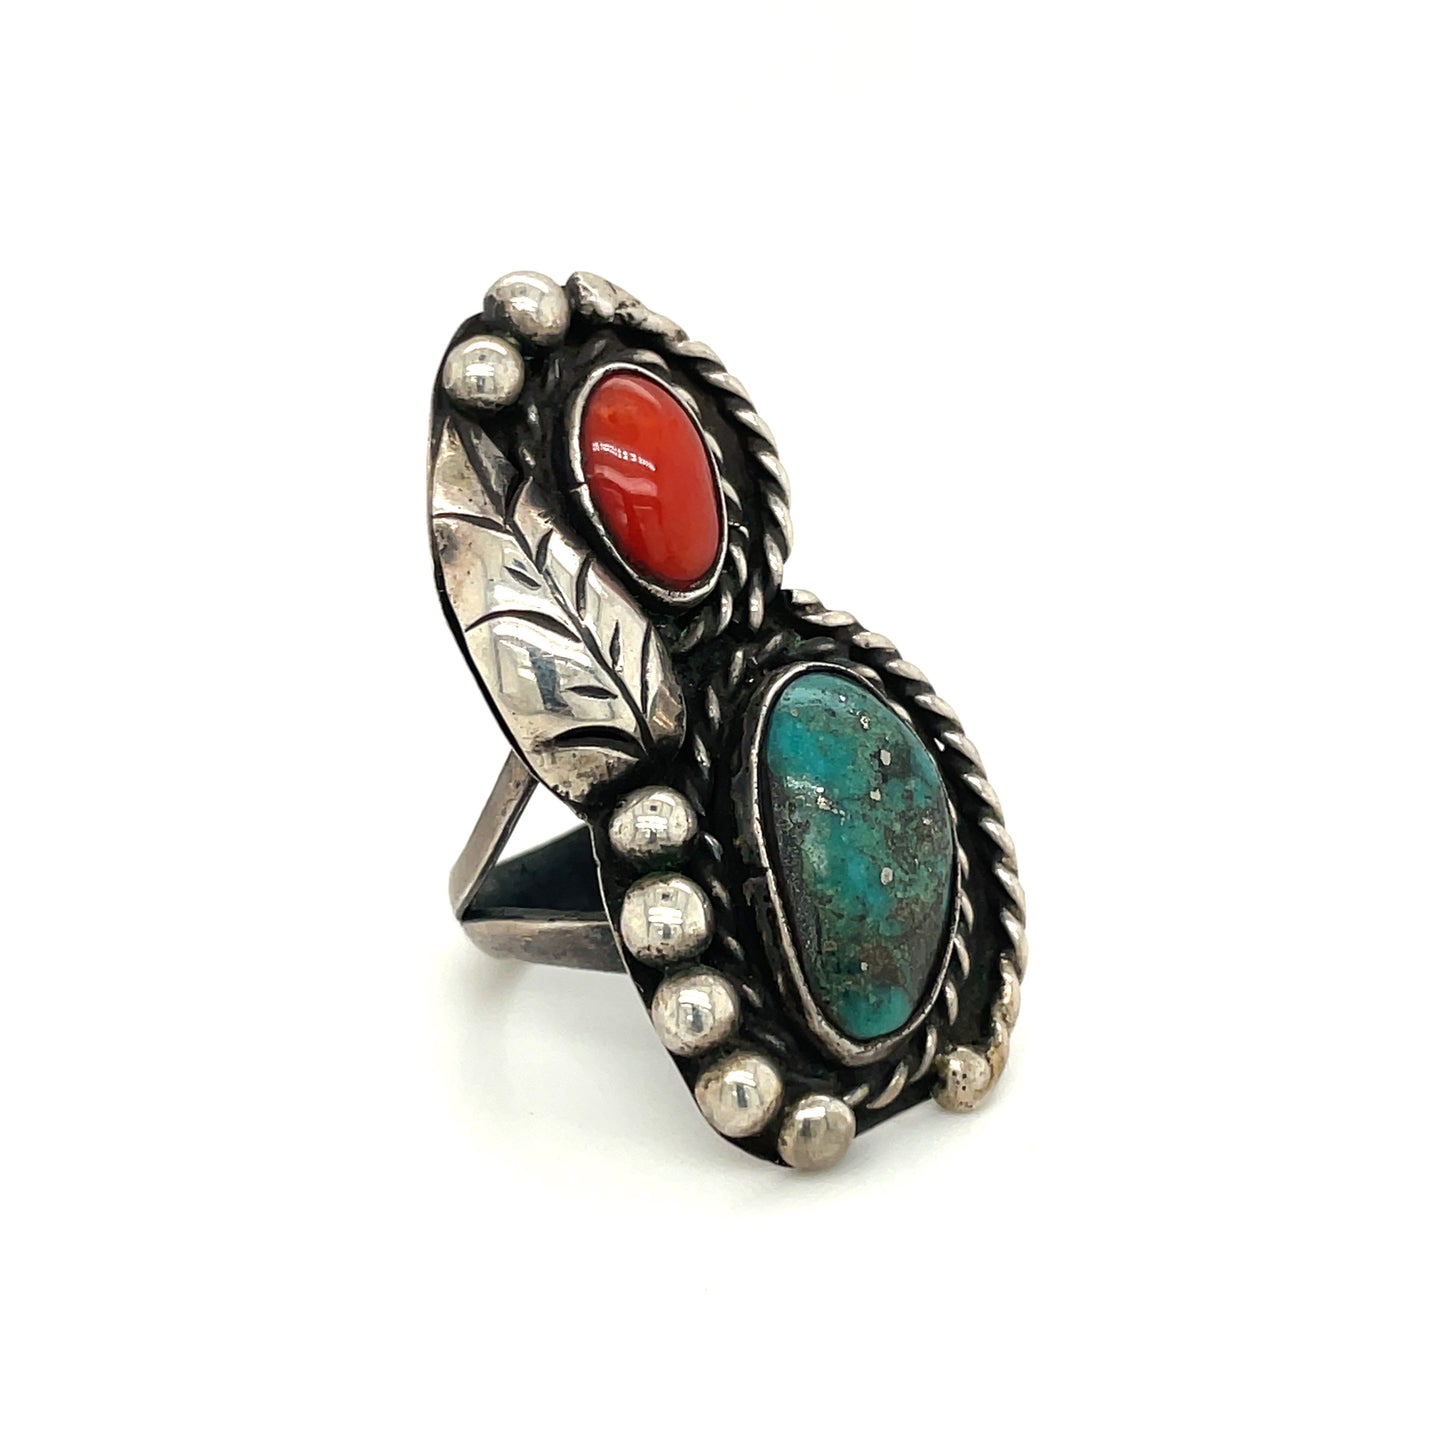 Vintage Southwestern Sterling Silver Turquoise and Coral Ring Size 6